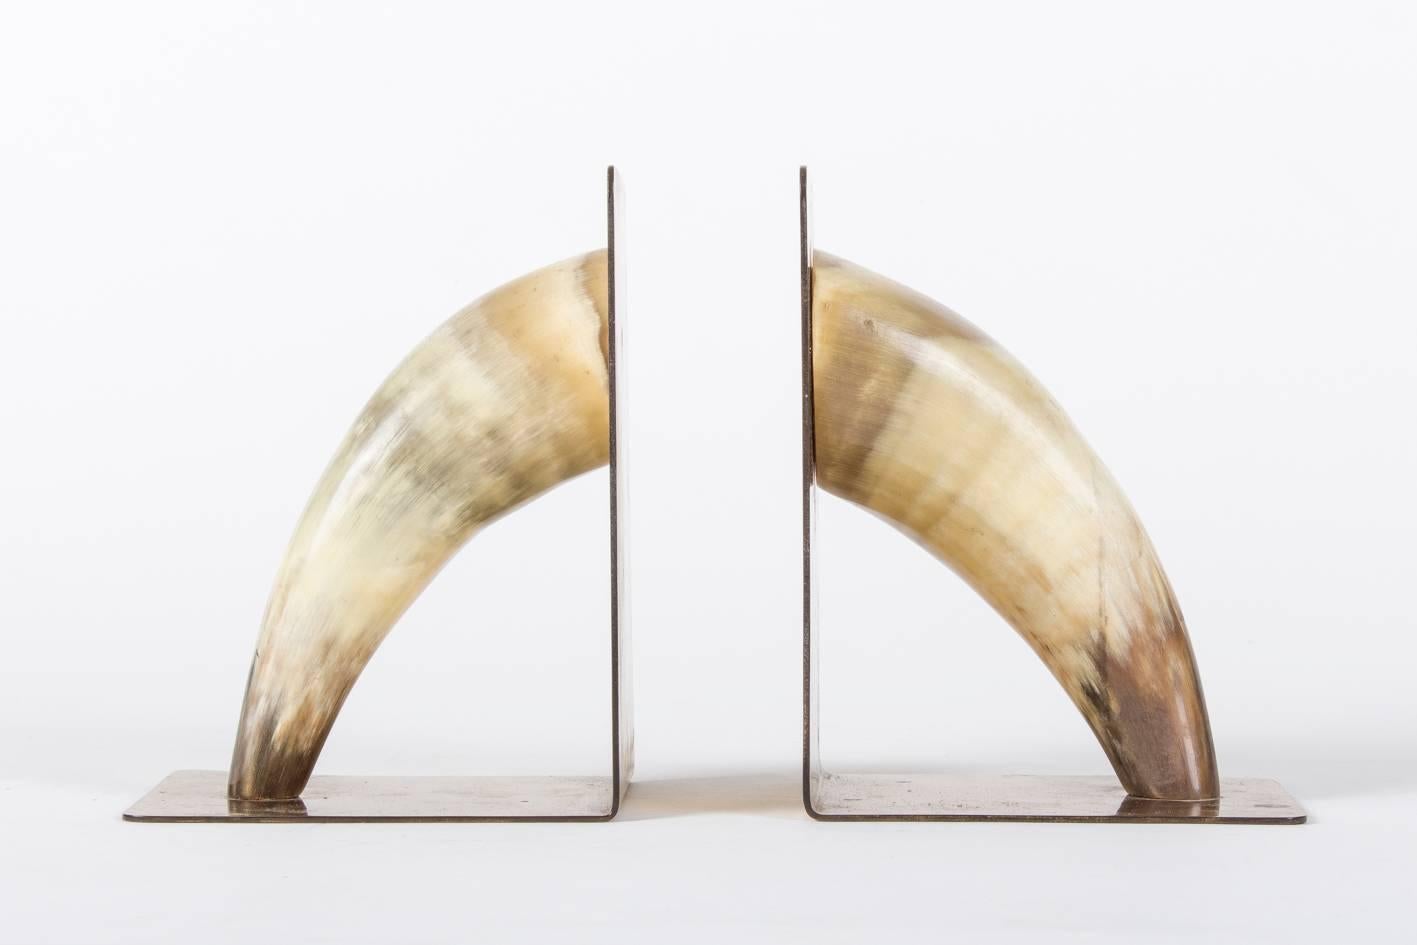 Polished Marked Mid-Century Carl Auböck Horn Bookends, Vienna, 1950s For Sale